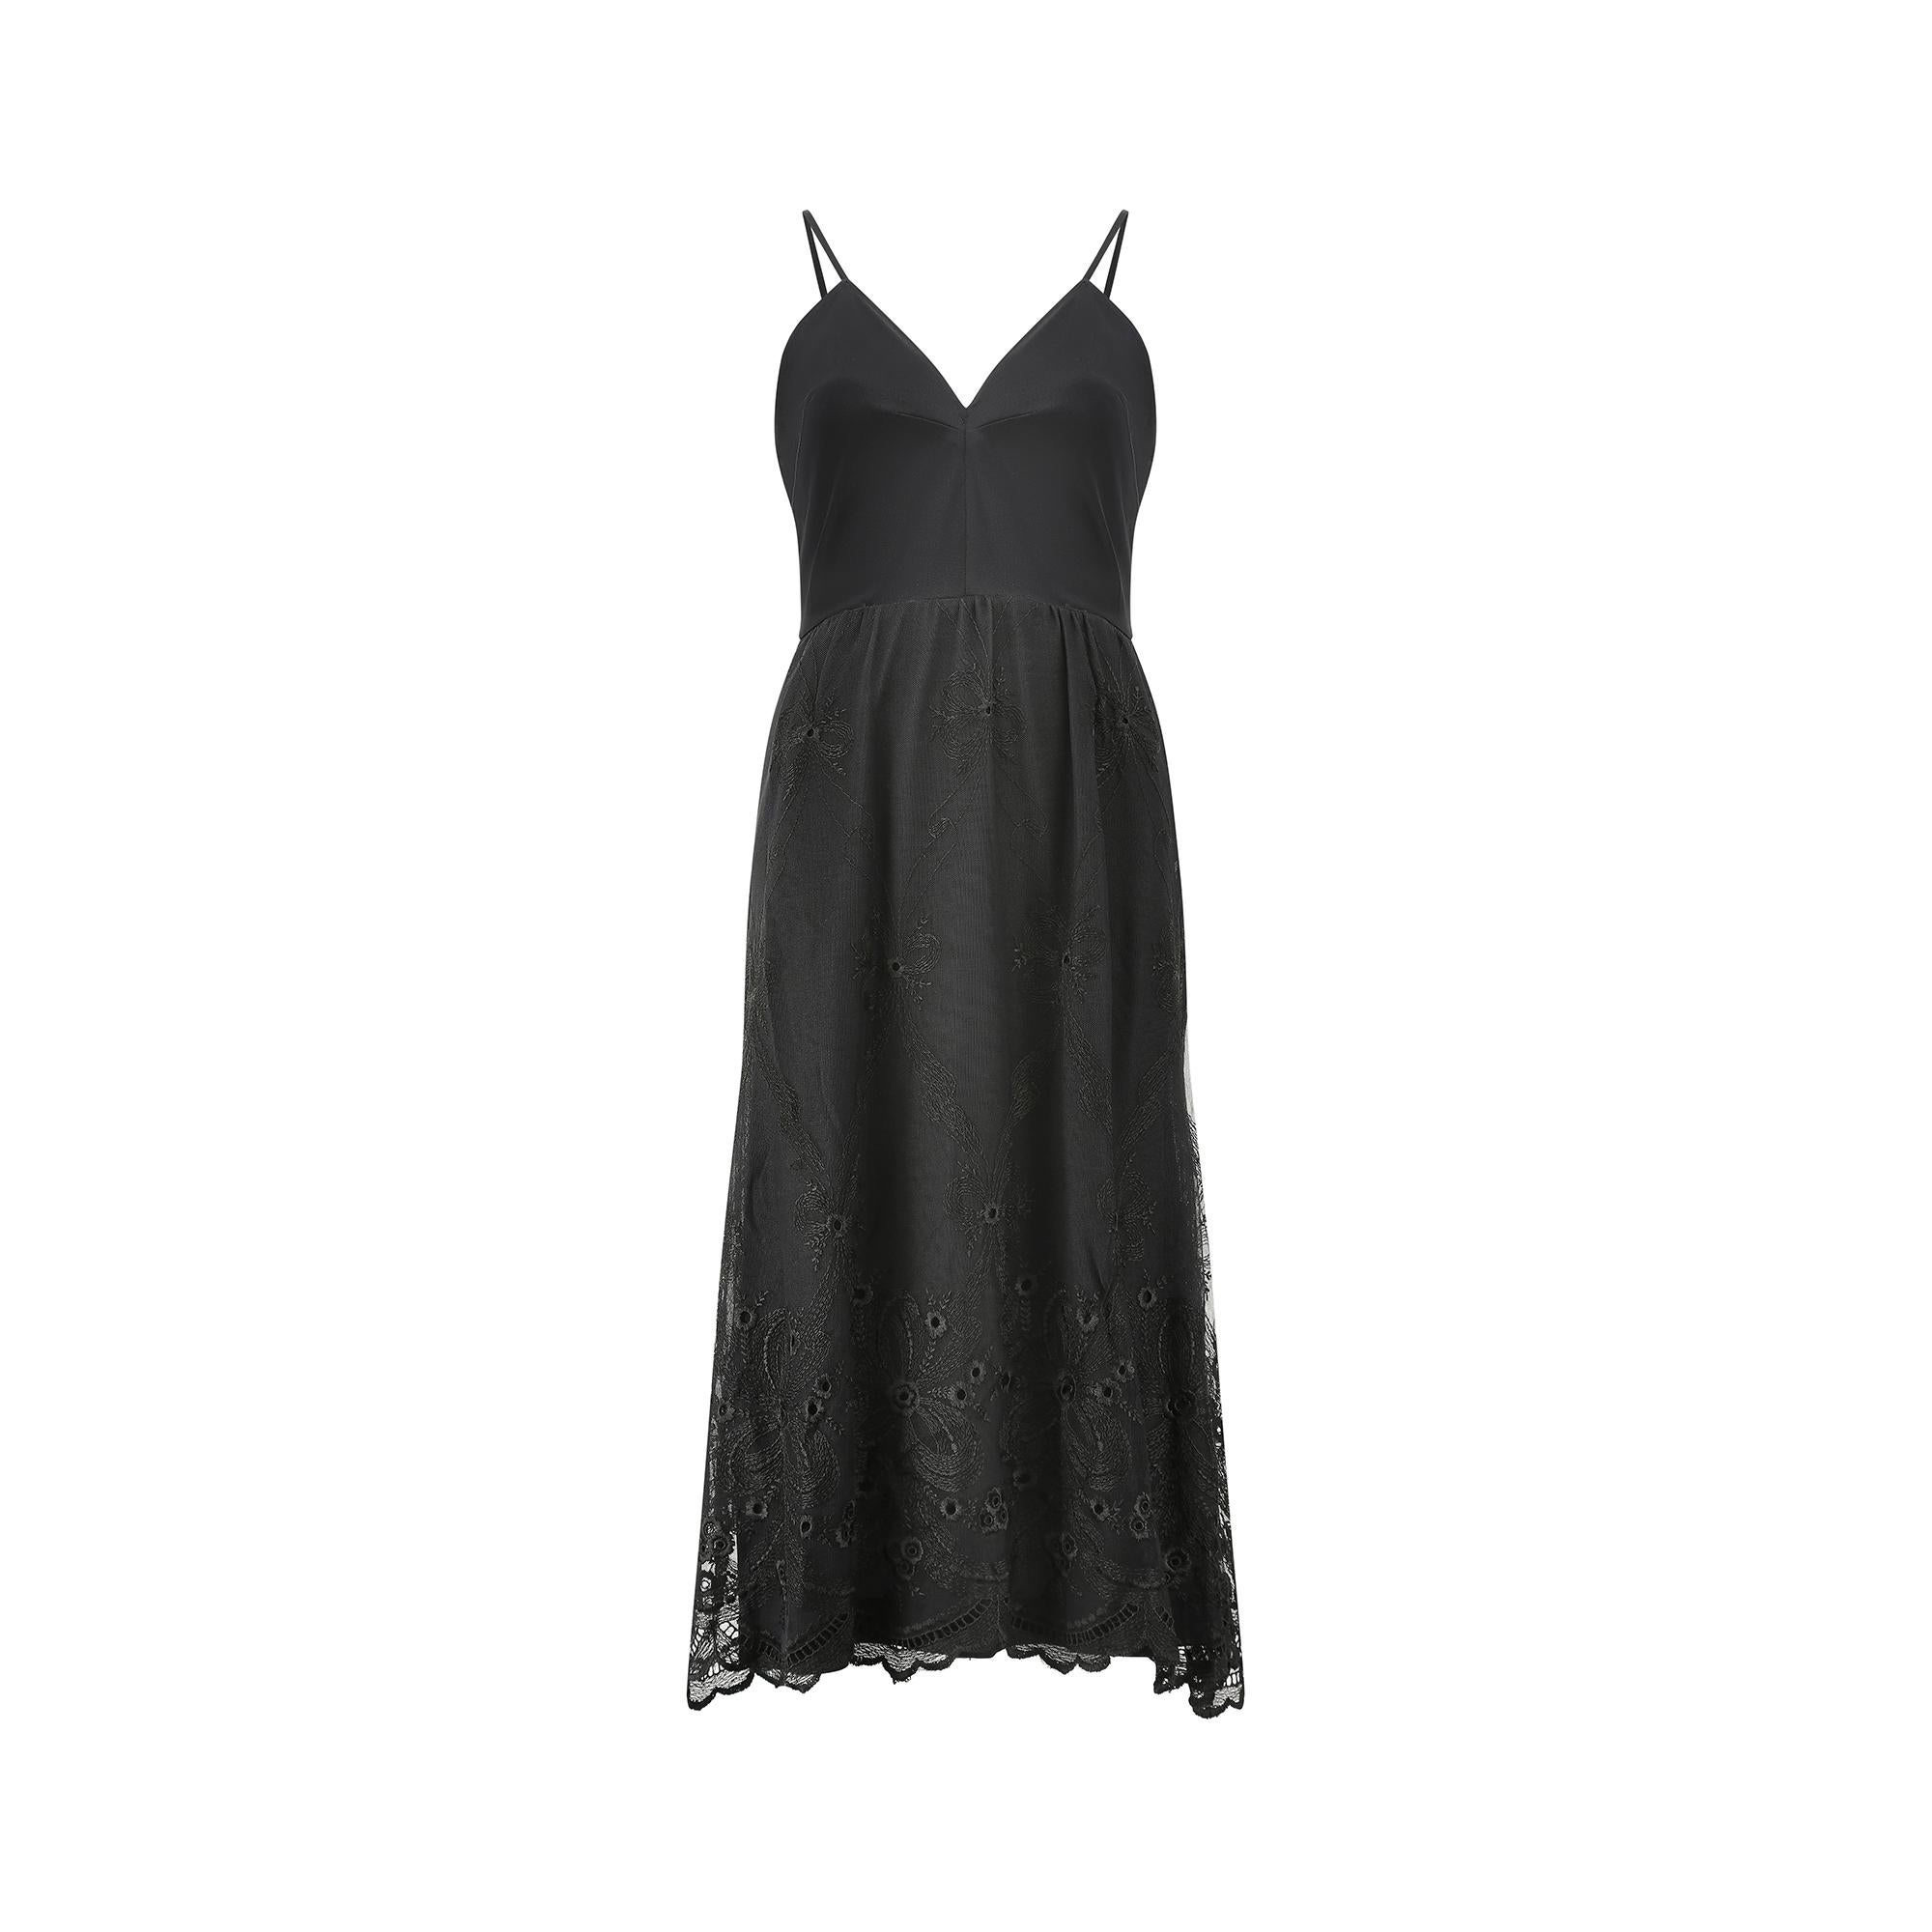 A good 1970s black slip dress by British heritage brand Frank Usher, perfect for a black tie or cocktail event. It has spaghetti straps, and a fitted bodice with a V neck front. The back is cut slightly lower, creating a flattering and feminine